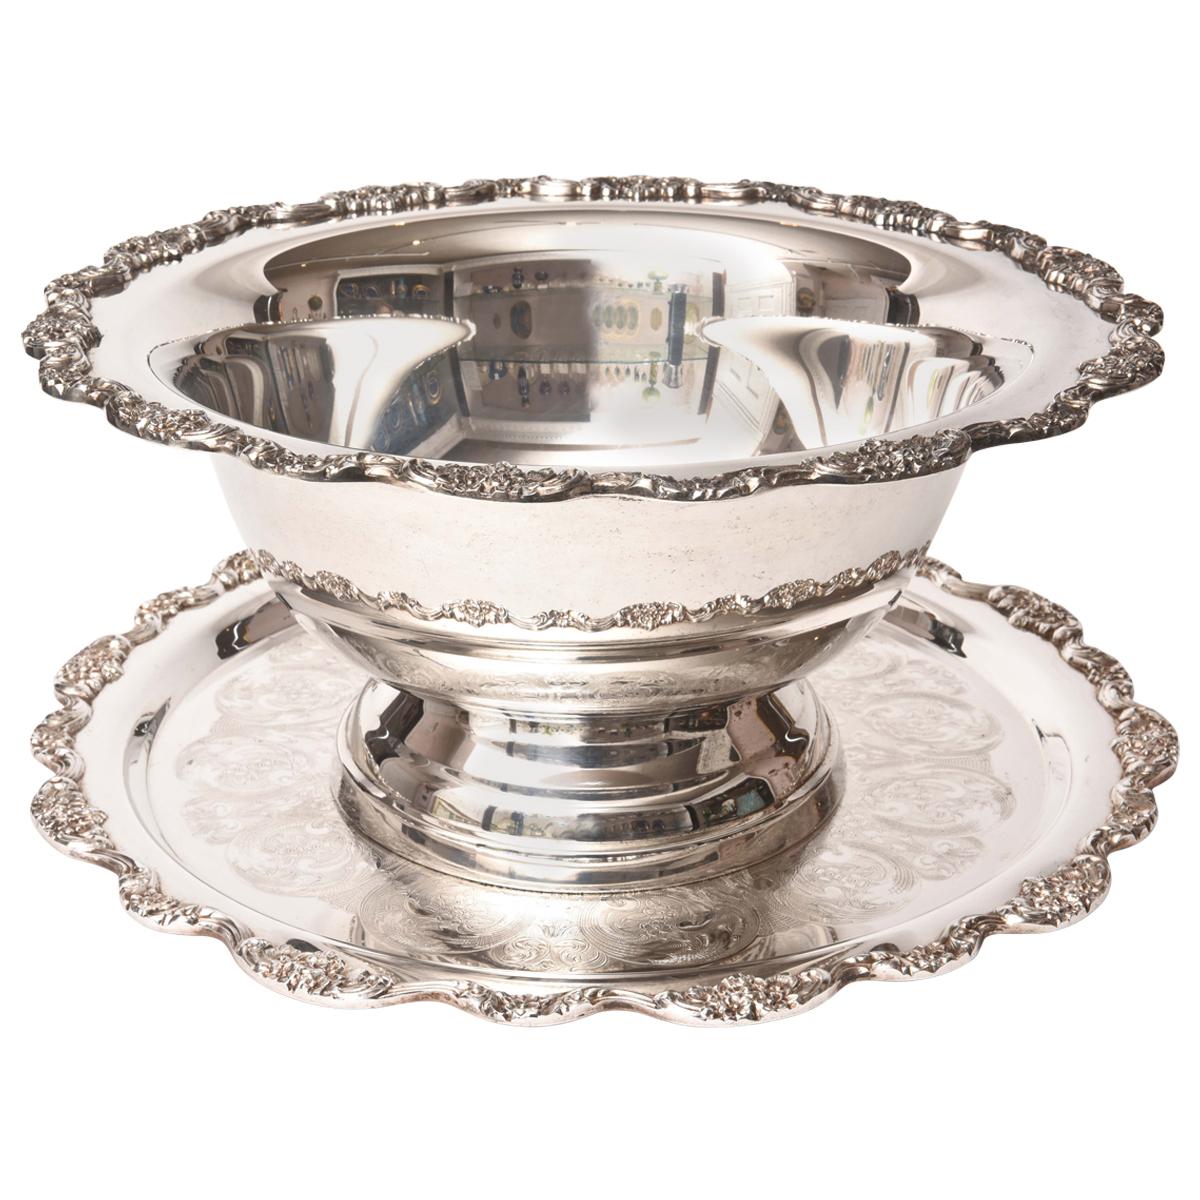 Impressive Silver Plate Punch Bowl and under Tray, American Vintage